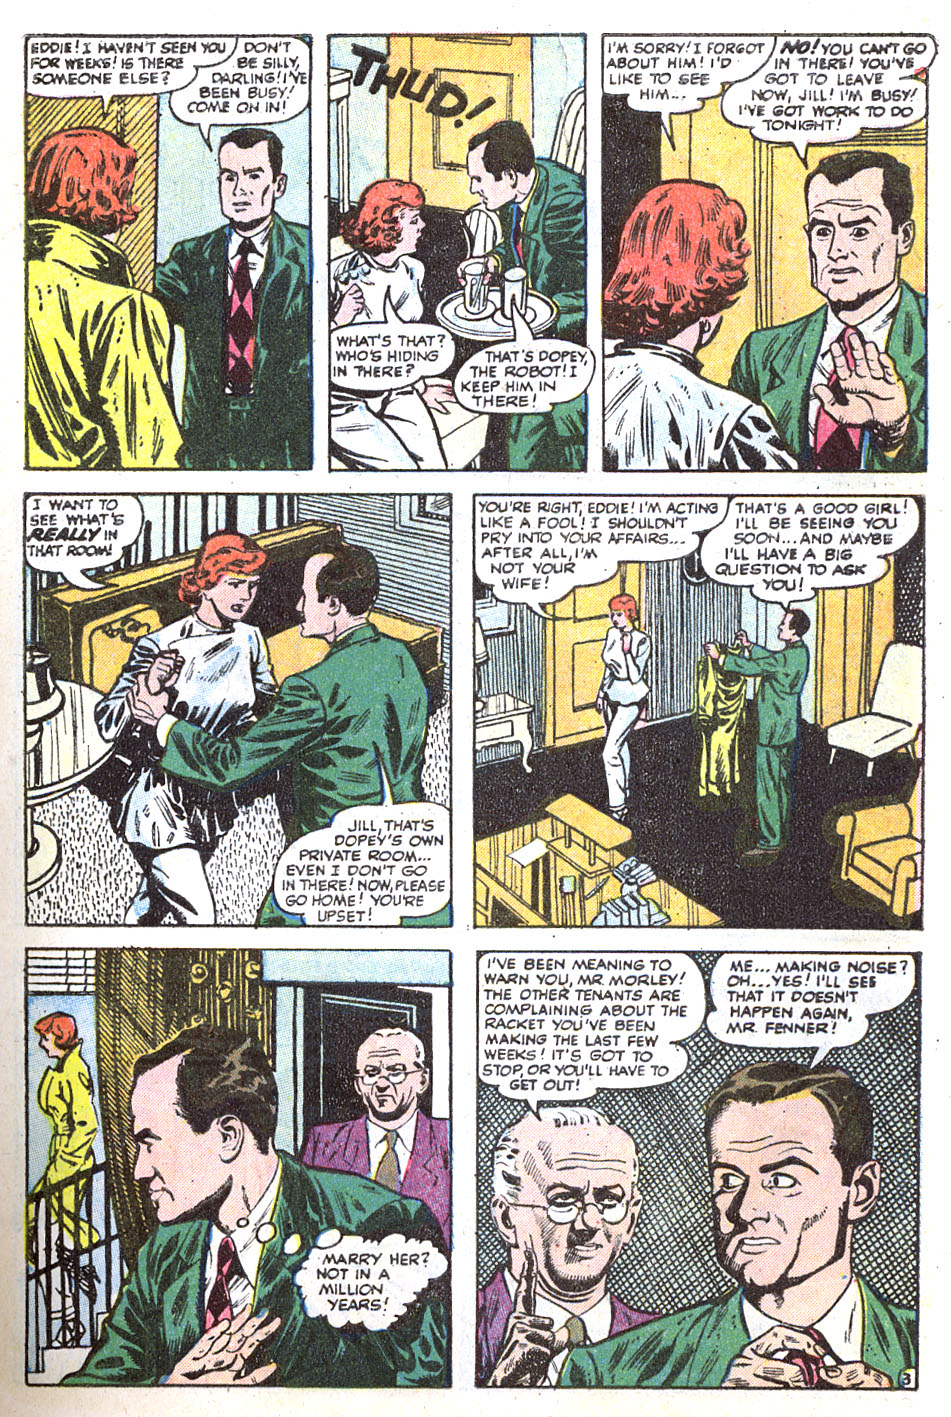 Journey Into Mystery (1952) 19 Page 4